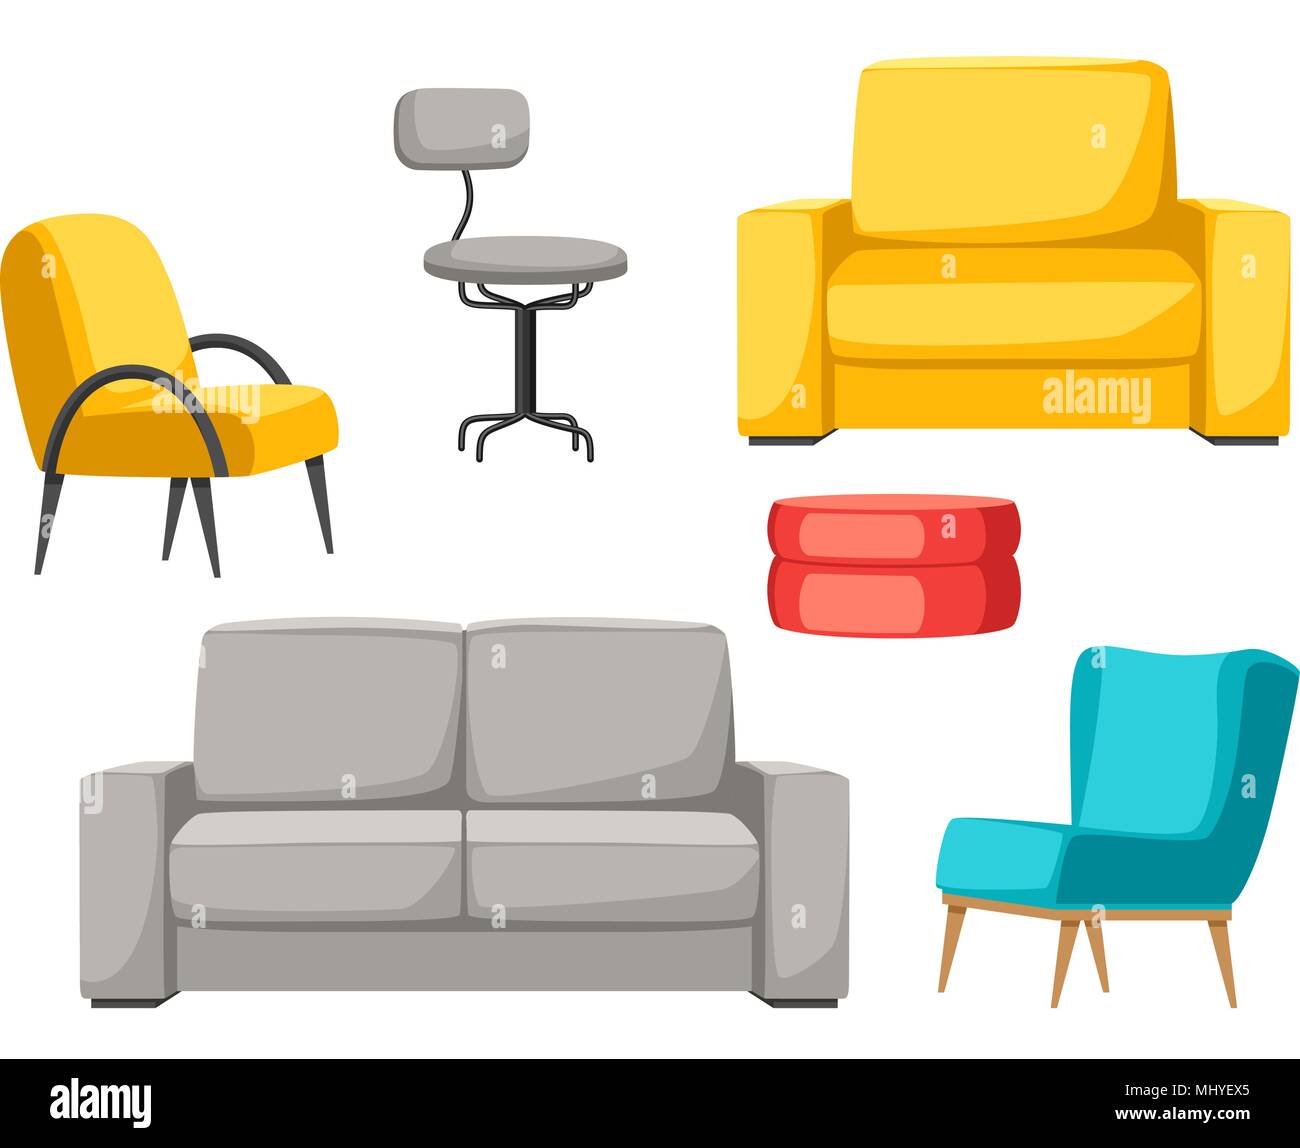 Interior and furniture set. Sofa armchair and pouf Stock Vector